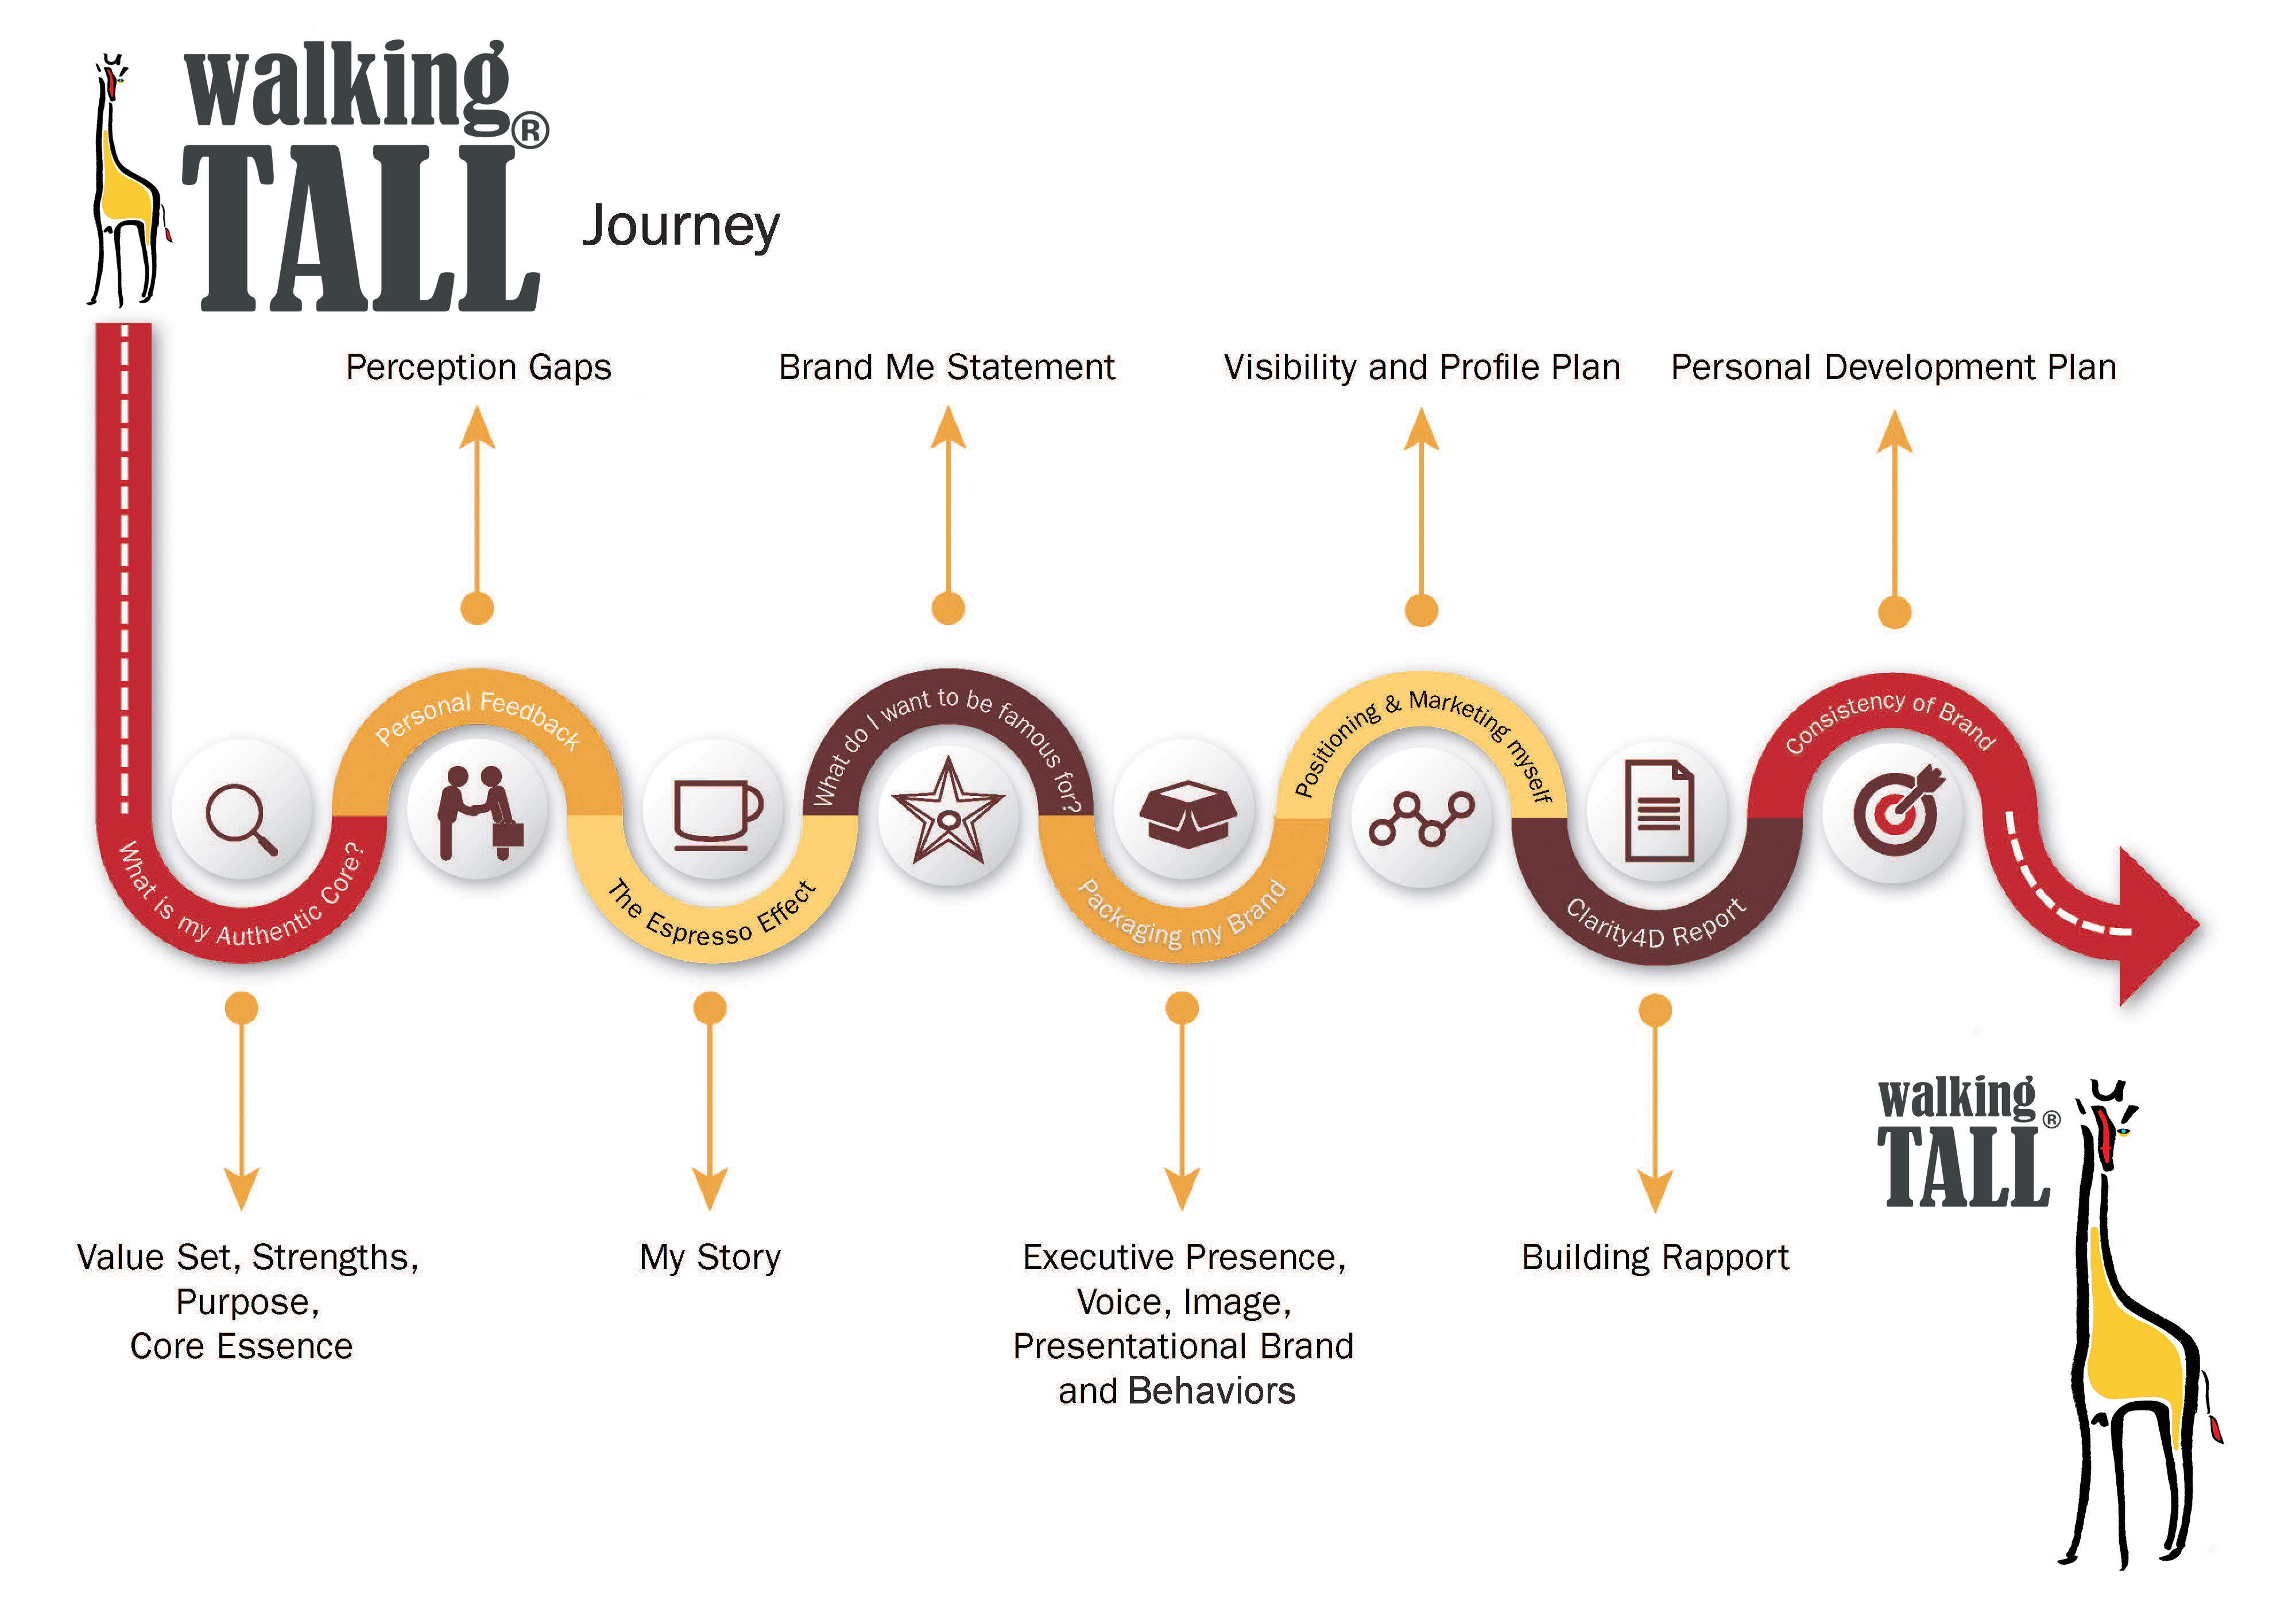 Photo of the walking tall journey with step